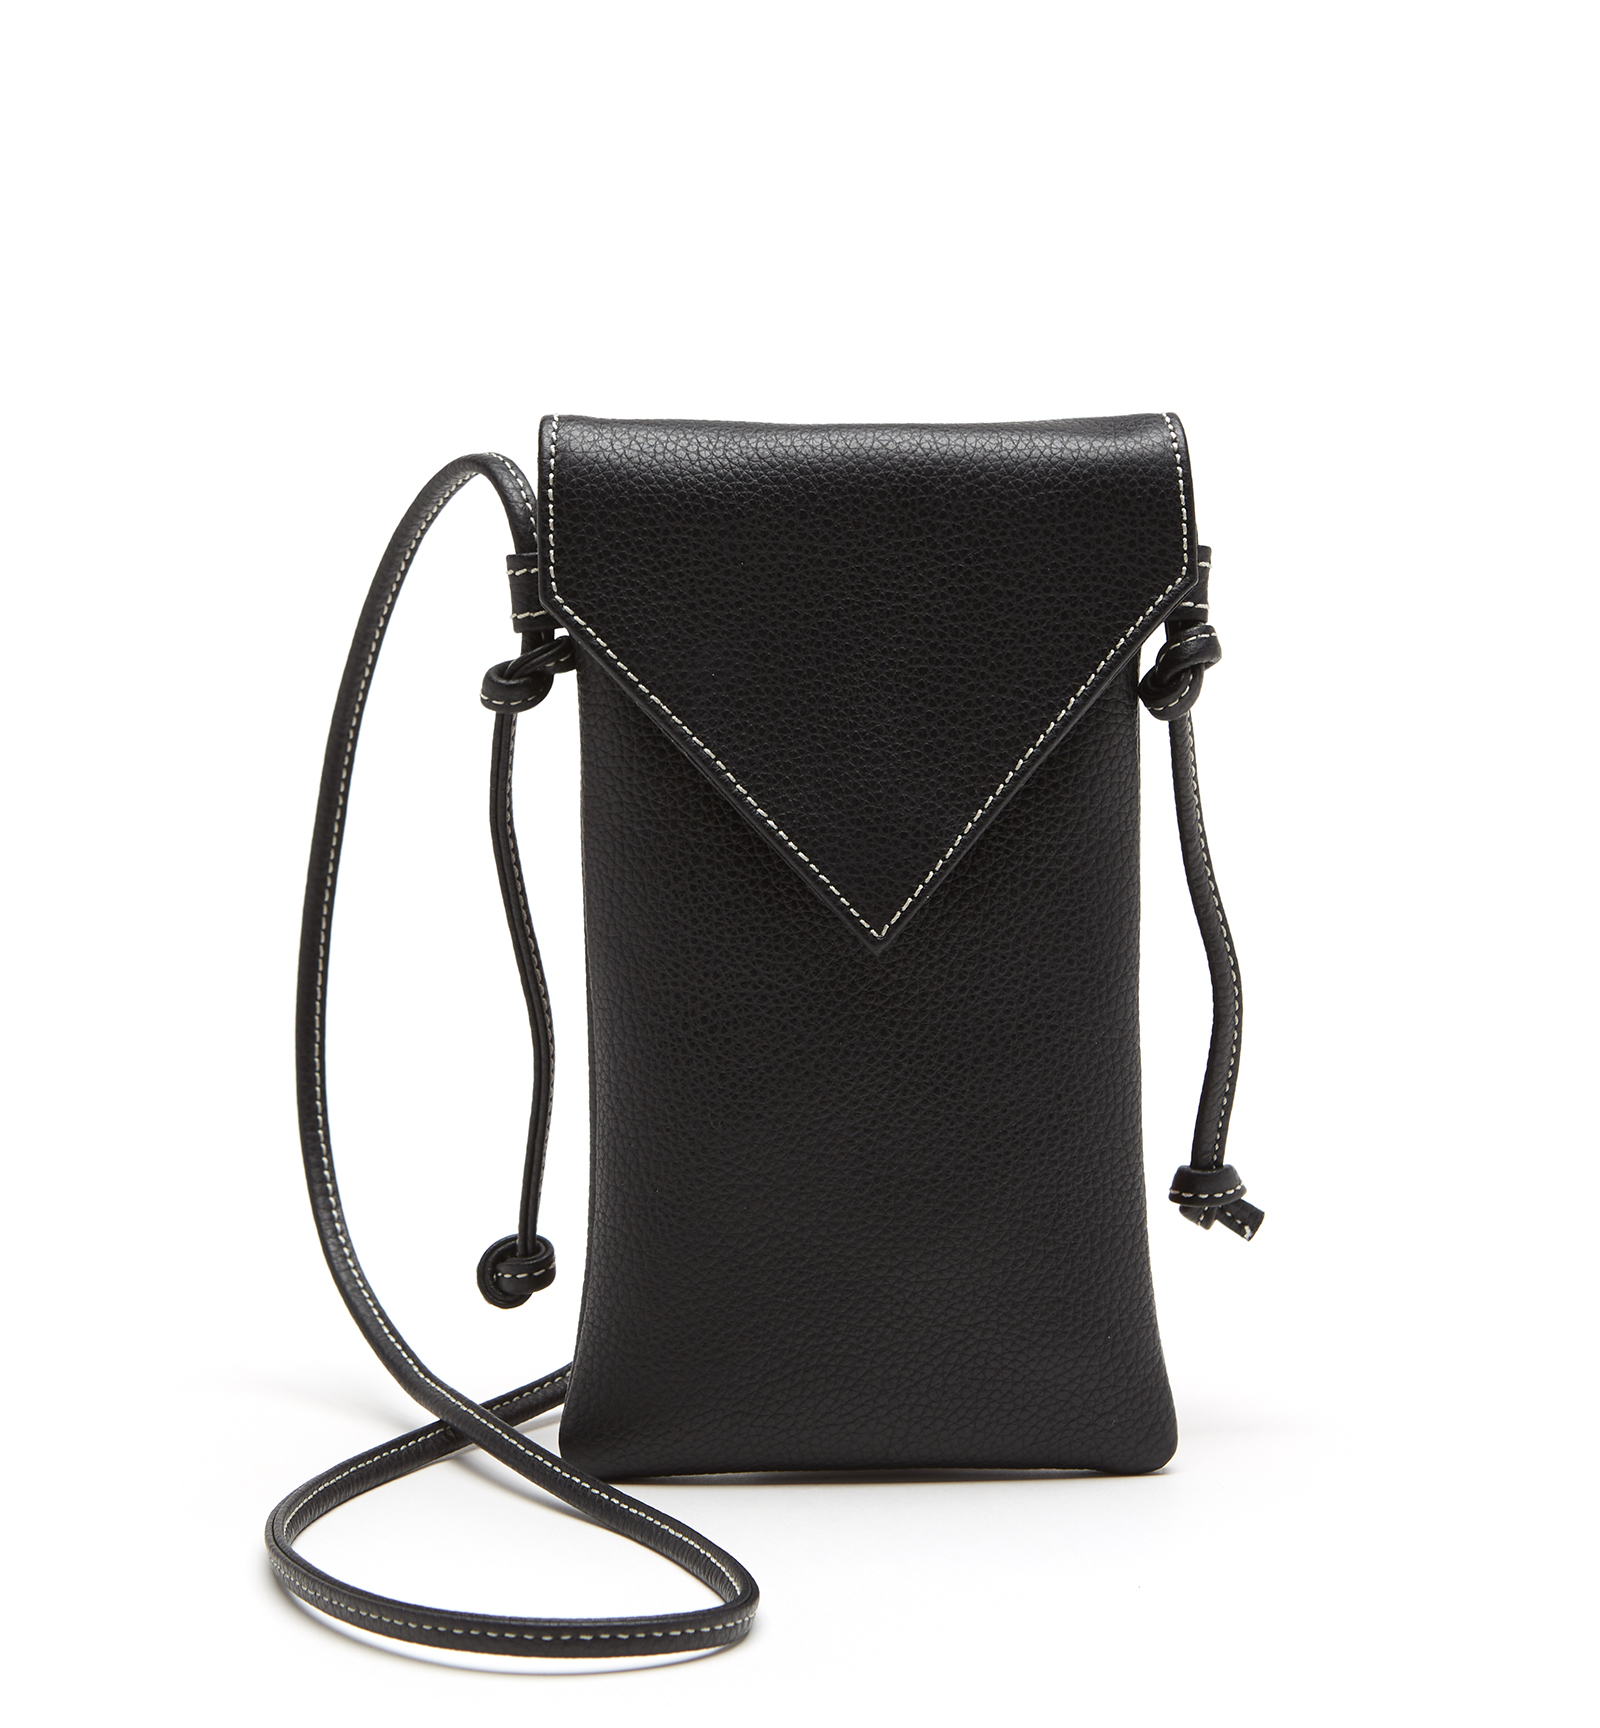 La Canadienne Marry Leather Phone Bag In Black